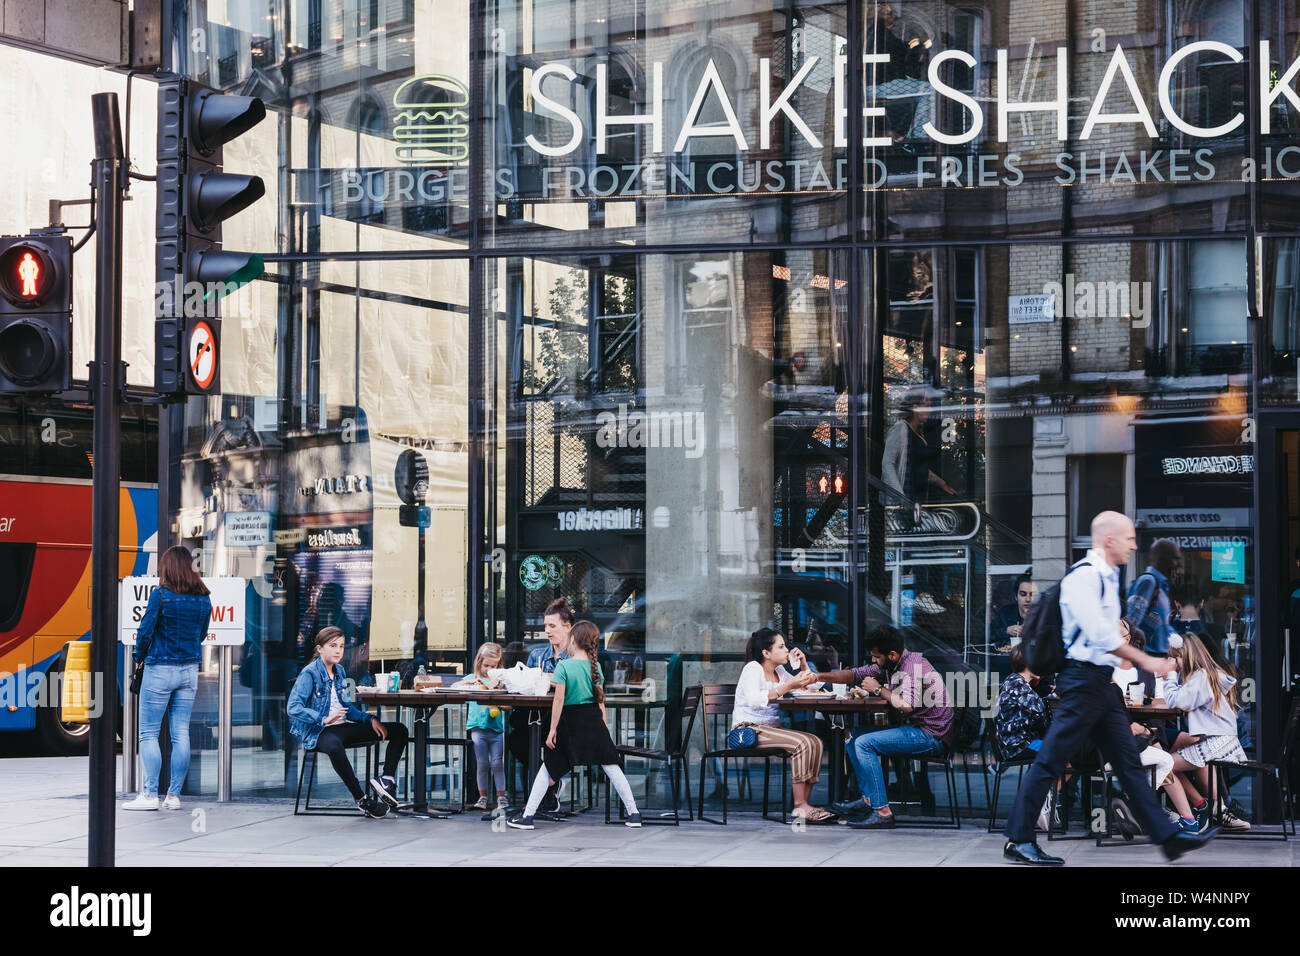 London, UK - July 15, 2019: People sitting at the outdoor tables of Shake Shack in Victoria station. Shake Shack is an American fast food restaurant c Stock Photo